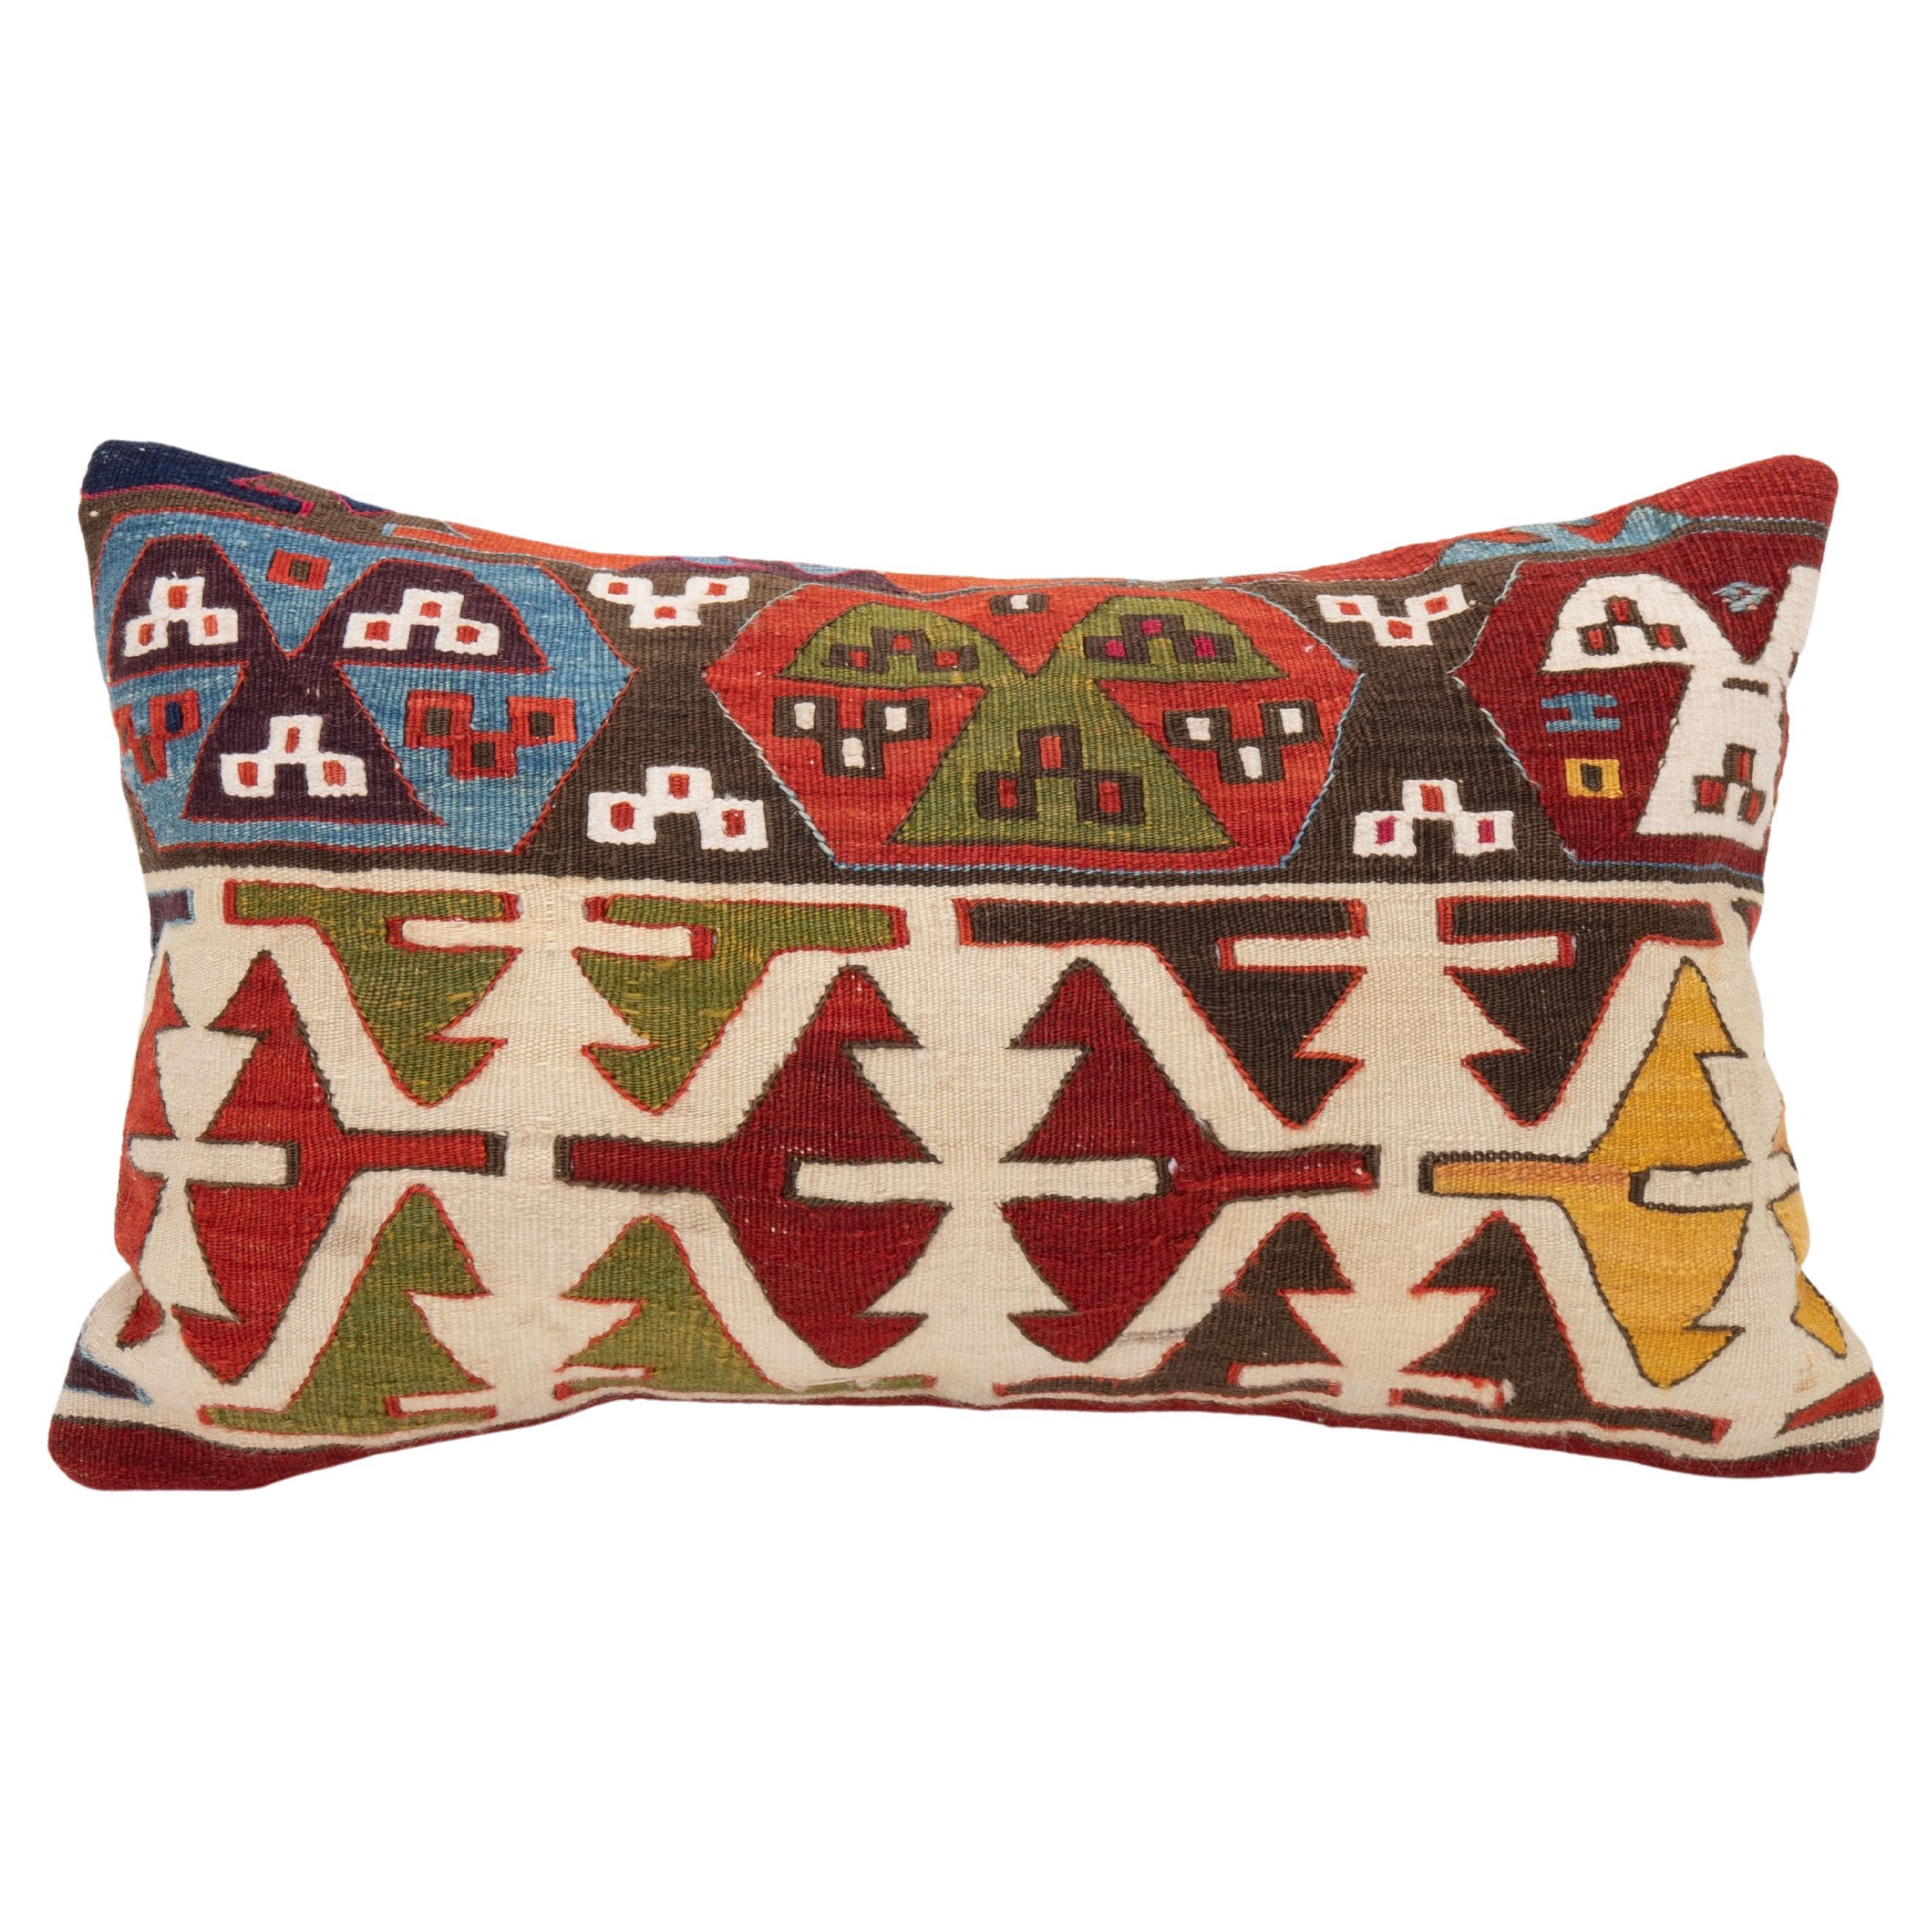 Kidney Pillow Case Made from an Antique Anatolian Kilim